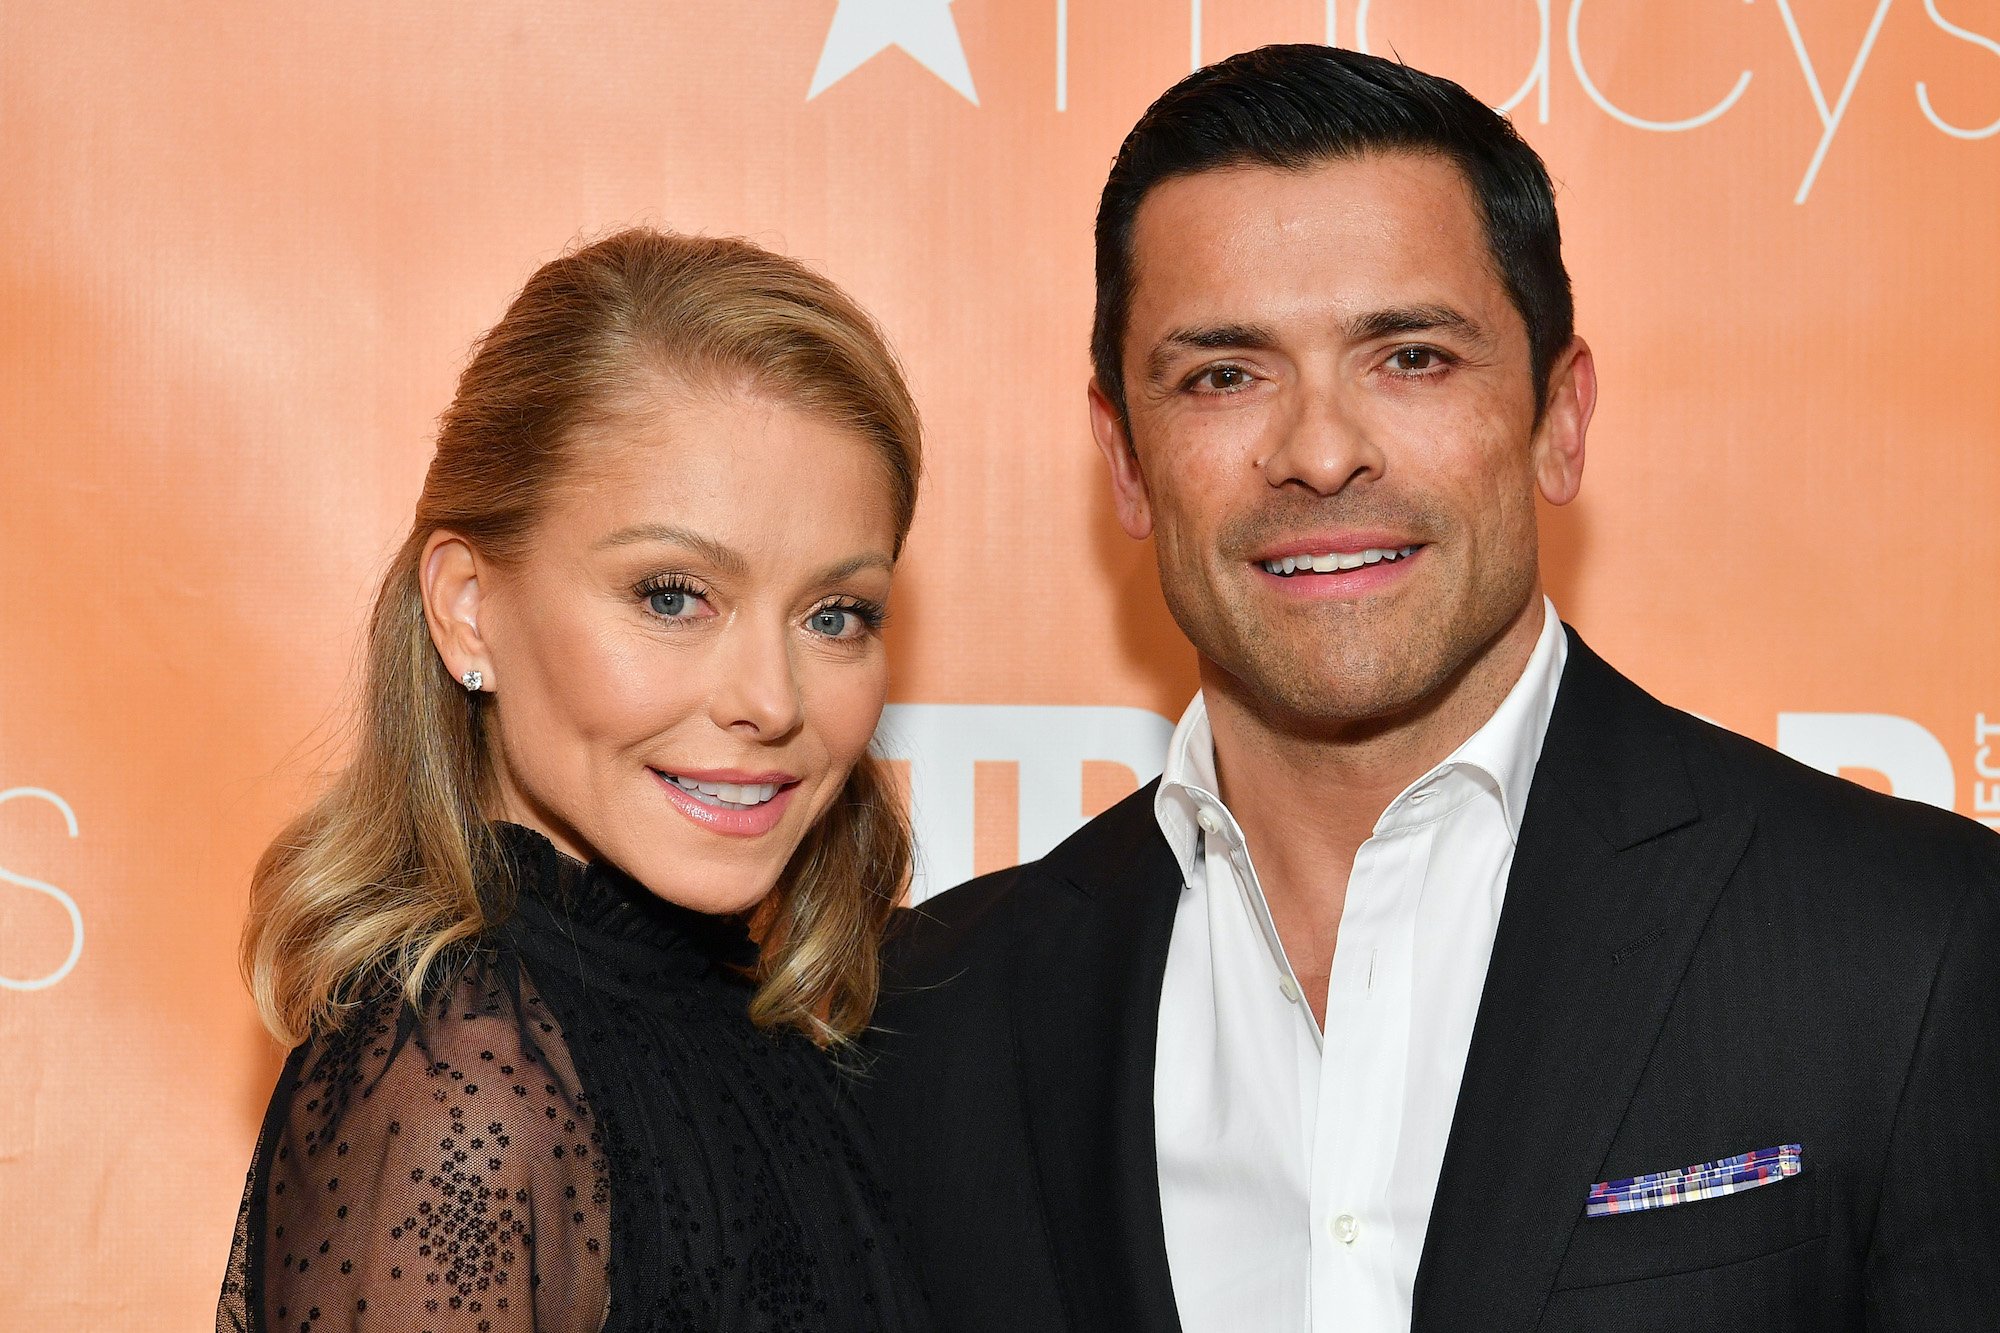 (L-R) Kelly Ripa and Mark Consuelos smiling in front of an orange background